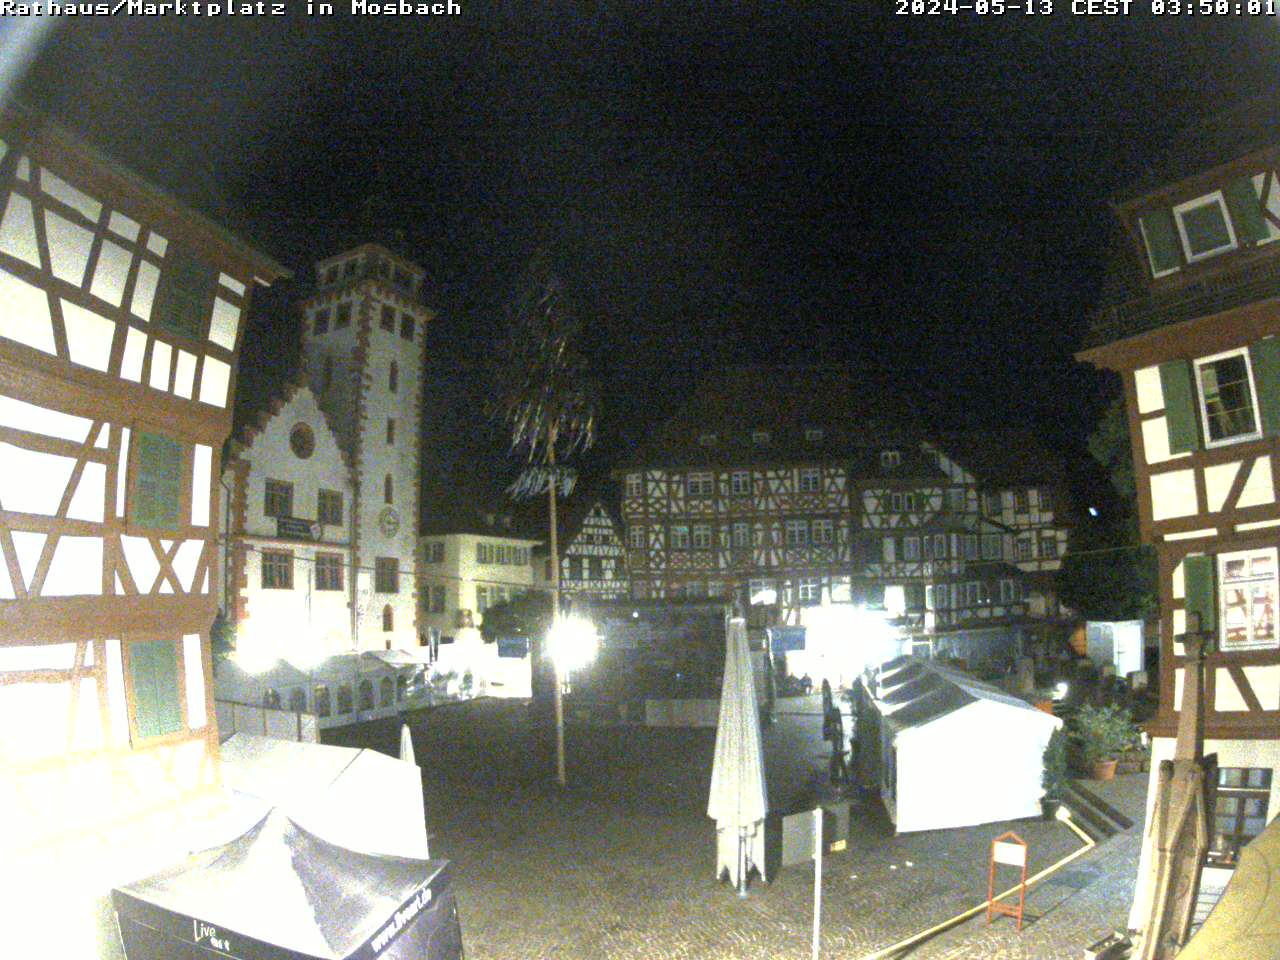 Mosbach Fre. 03:54